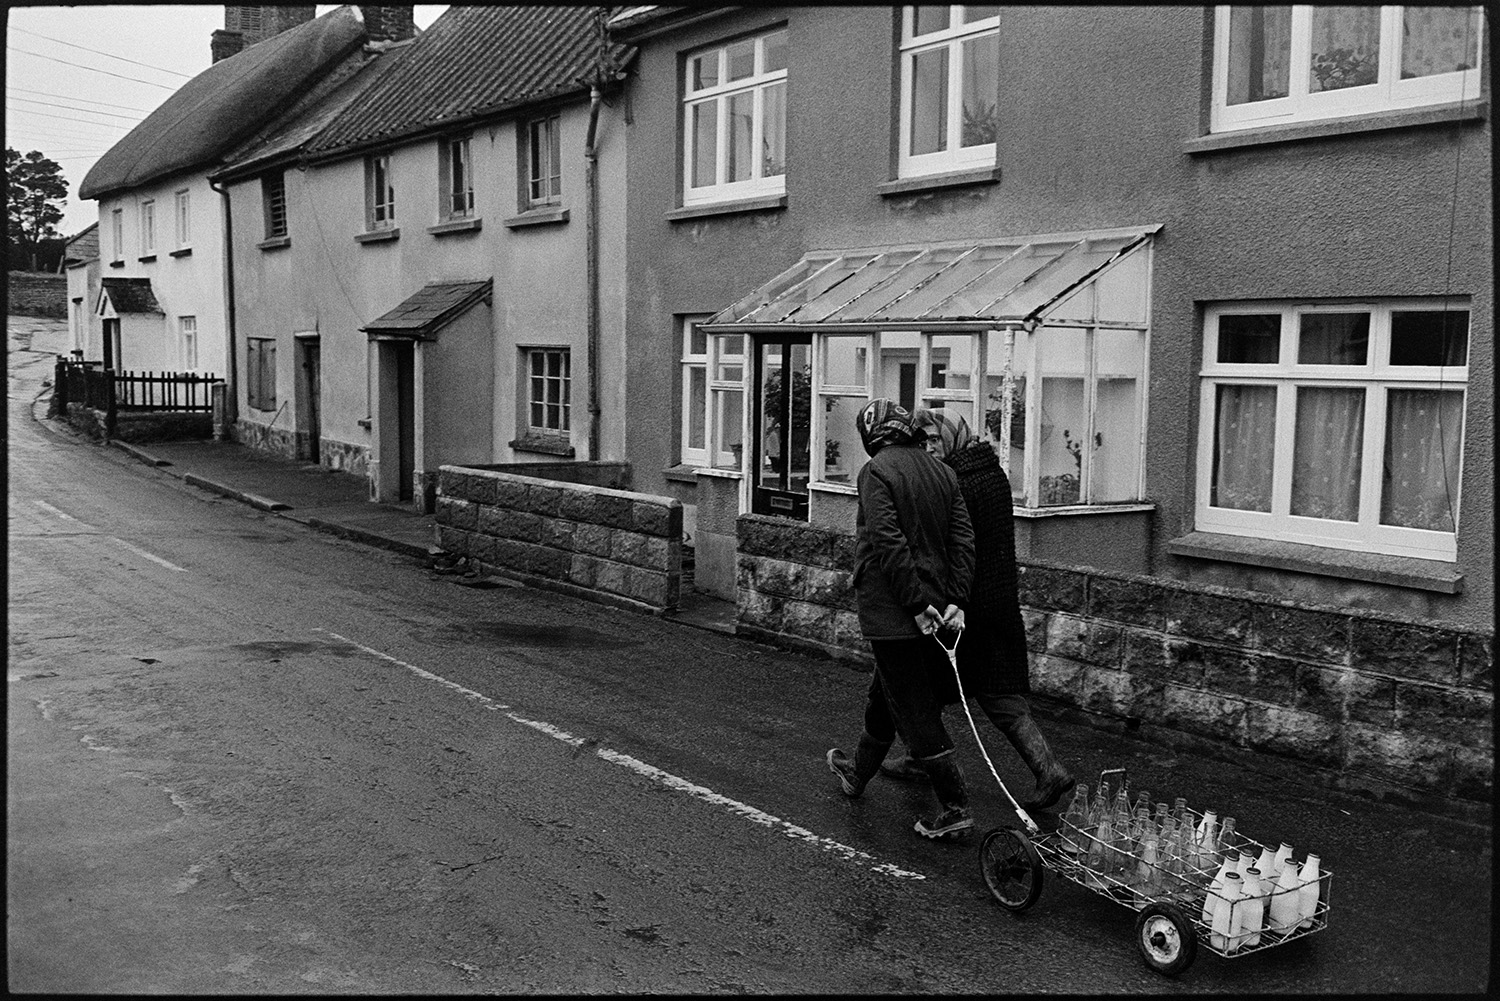 Woman delivering milk round village. <br />
[Jane Woolacott delivering milk to houses in Atherington. She is pulling a trolley with the milk bottles. Another woman is walking with her.]